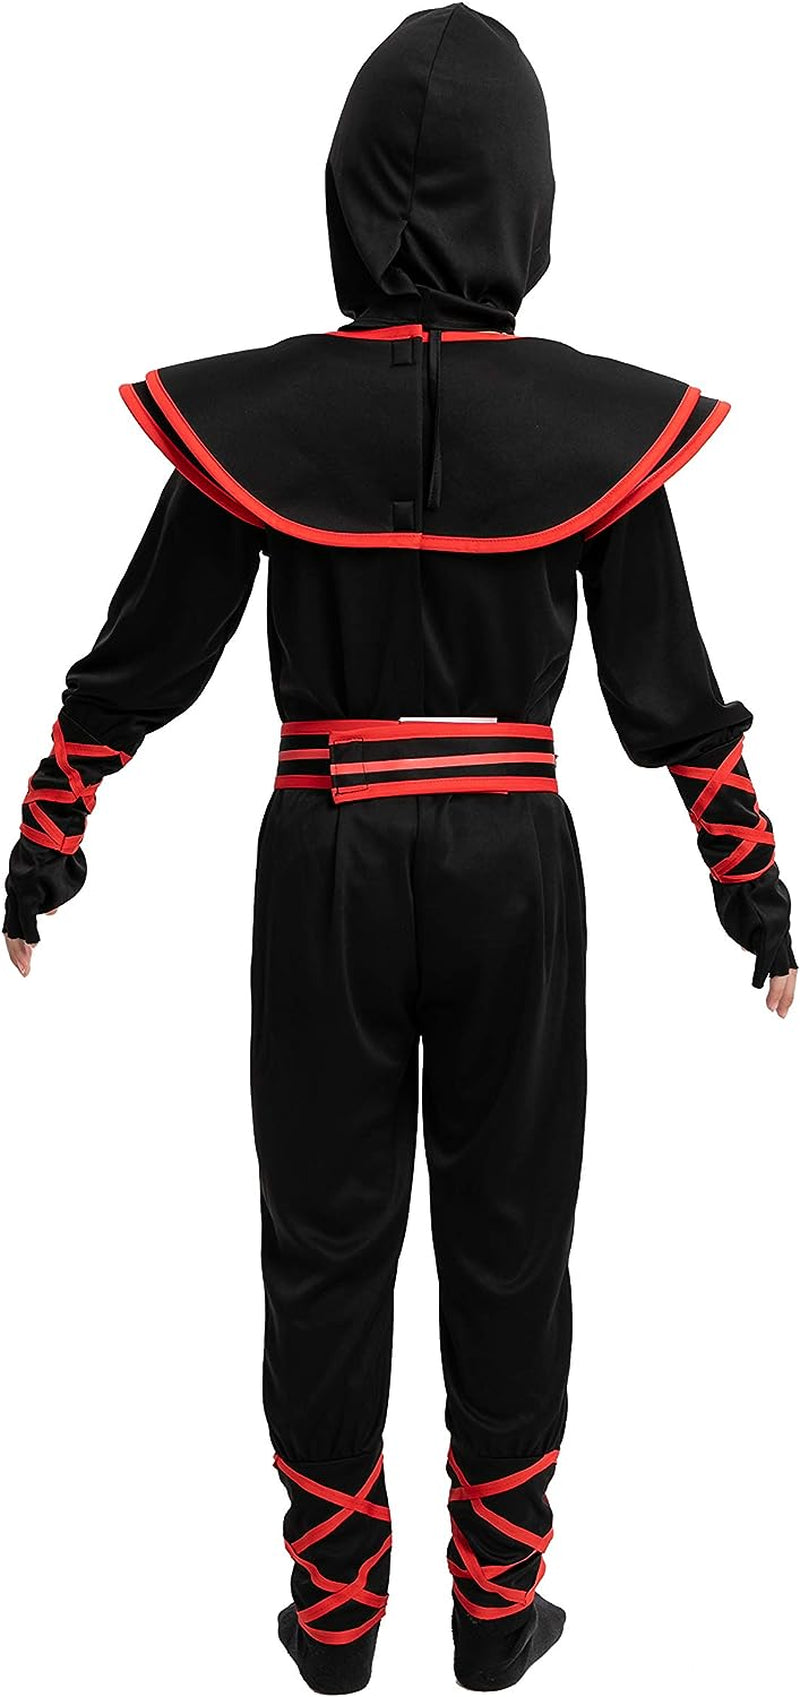 Spooktacular Creations Halloween Red Ninja Muscle Costume Deluxe Set for Boys, Unisex Kungfu Outfit for Kids 3-14Yr with Foam Accessories (Small 5-7 Yrs)  Joyin Inc   